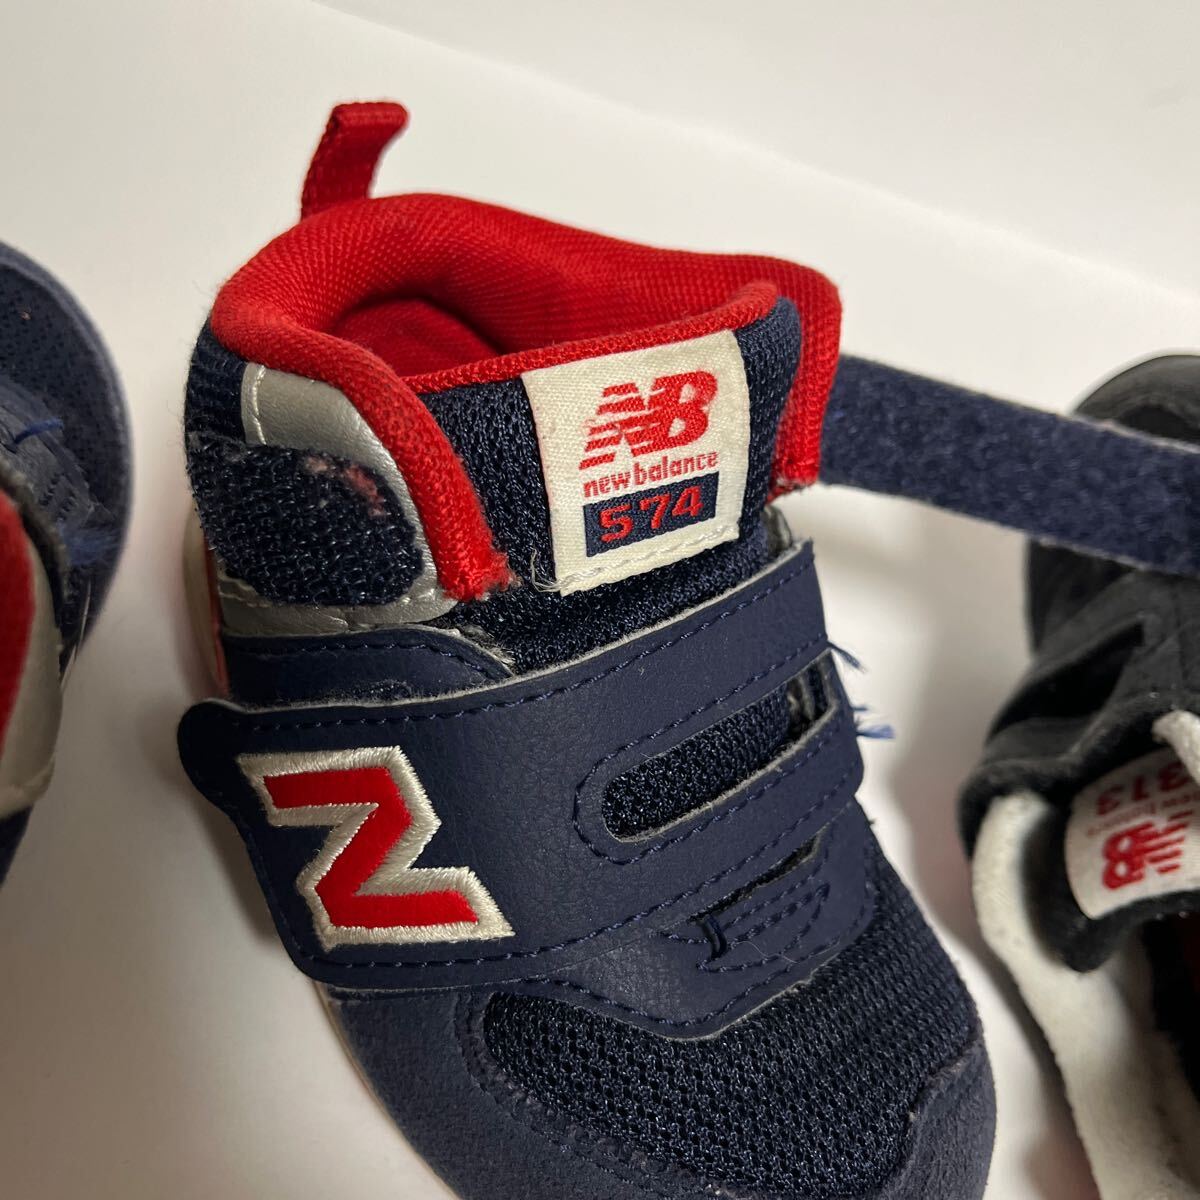  New balance navy black 13. in set!! 574/313 baby shoes 